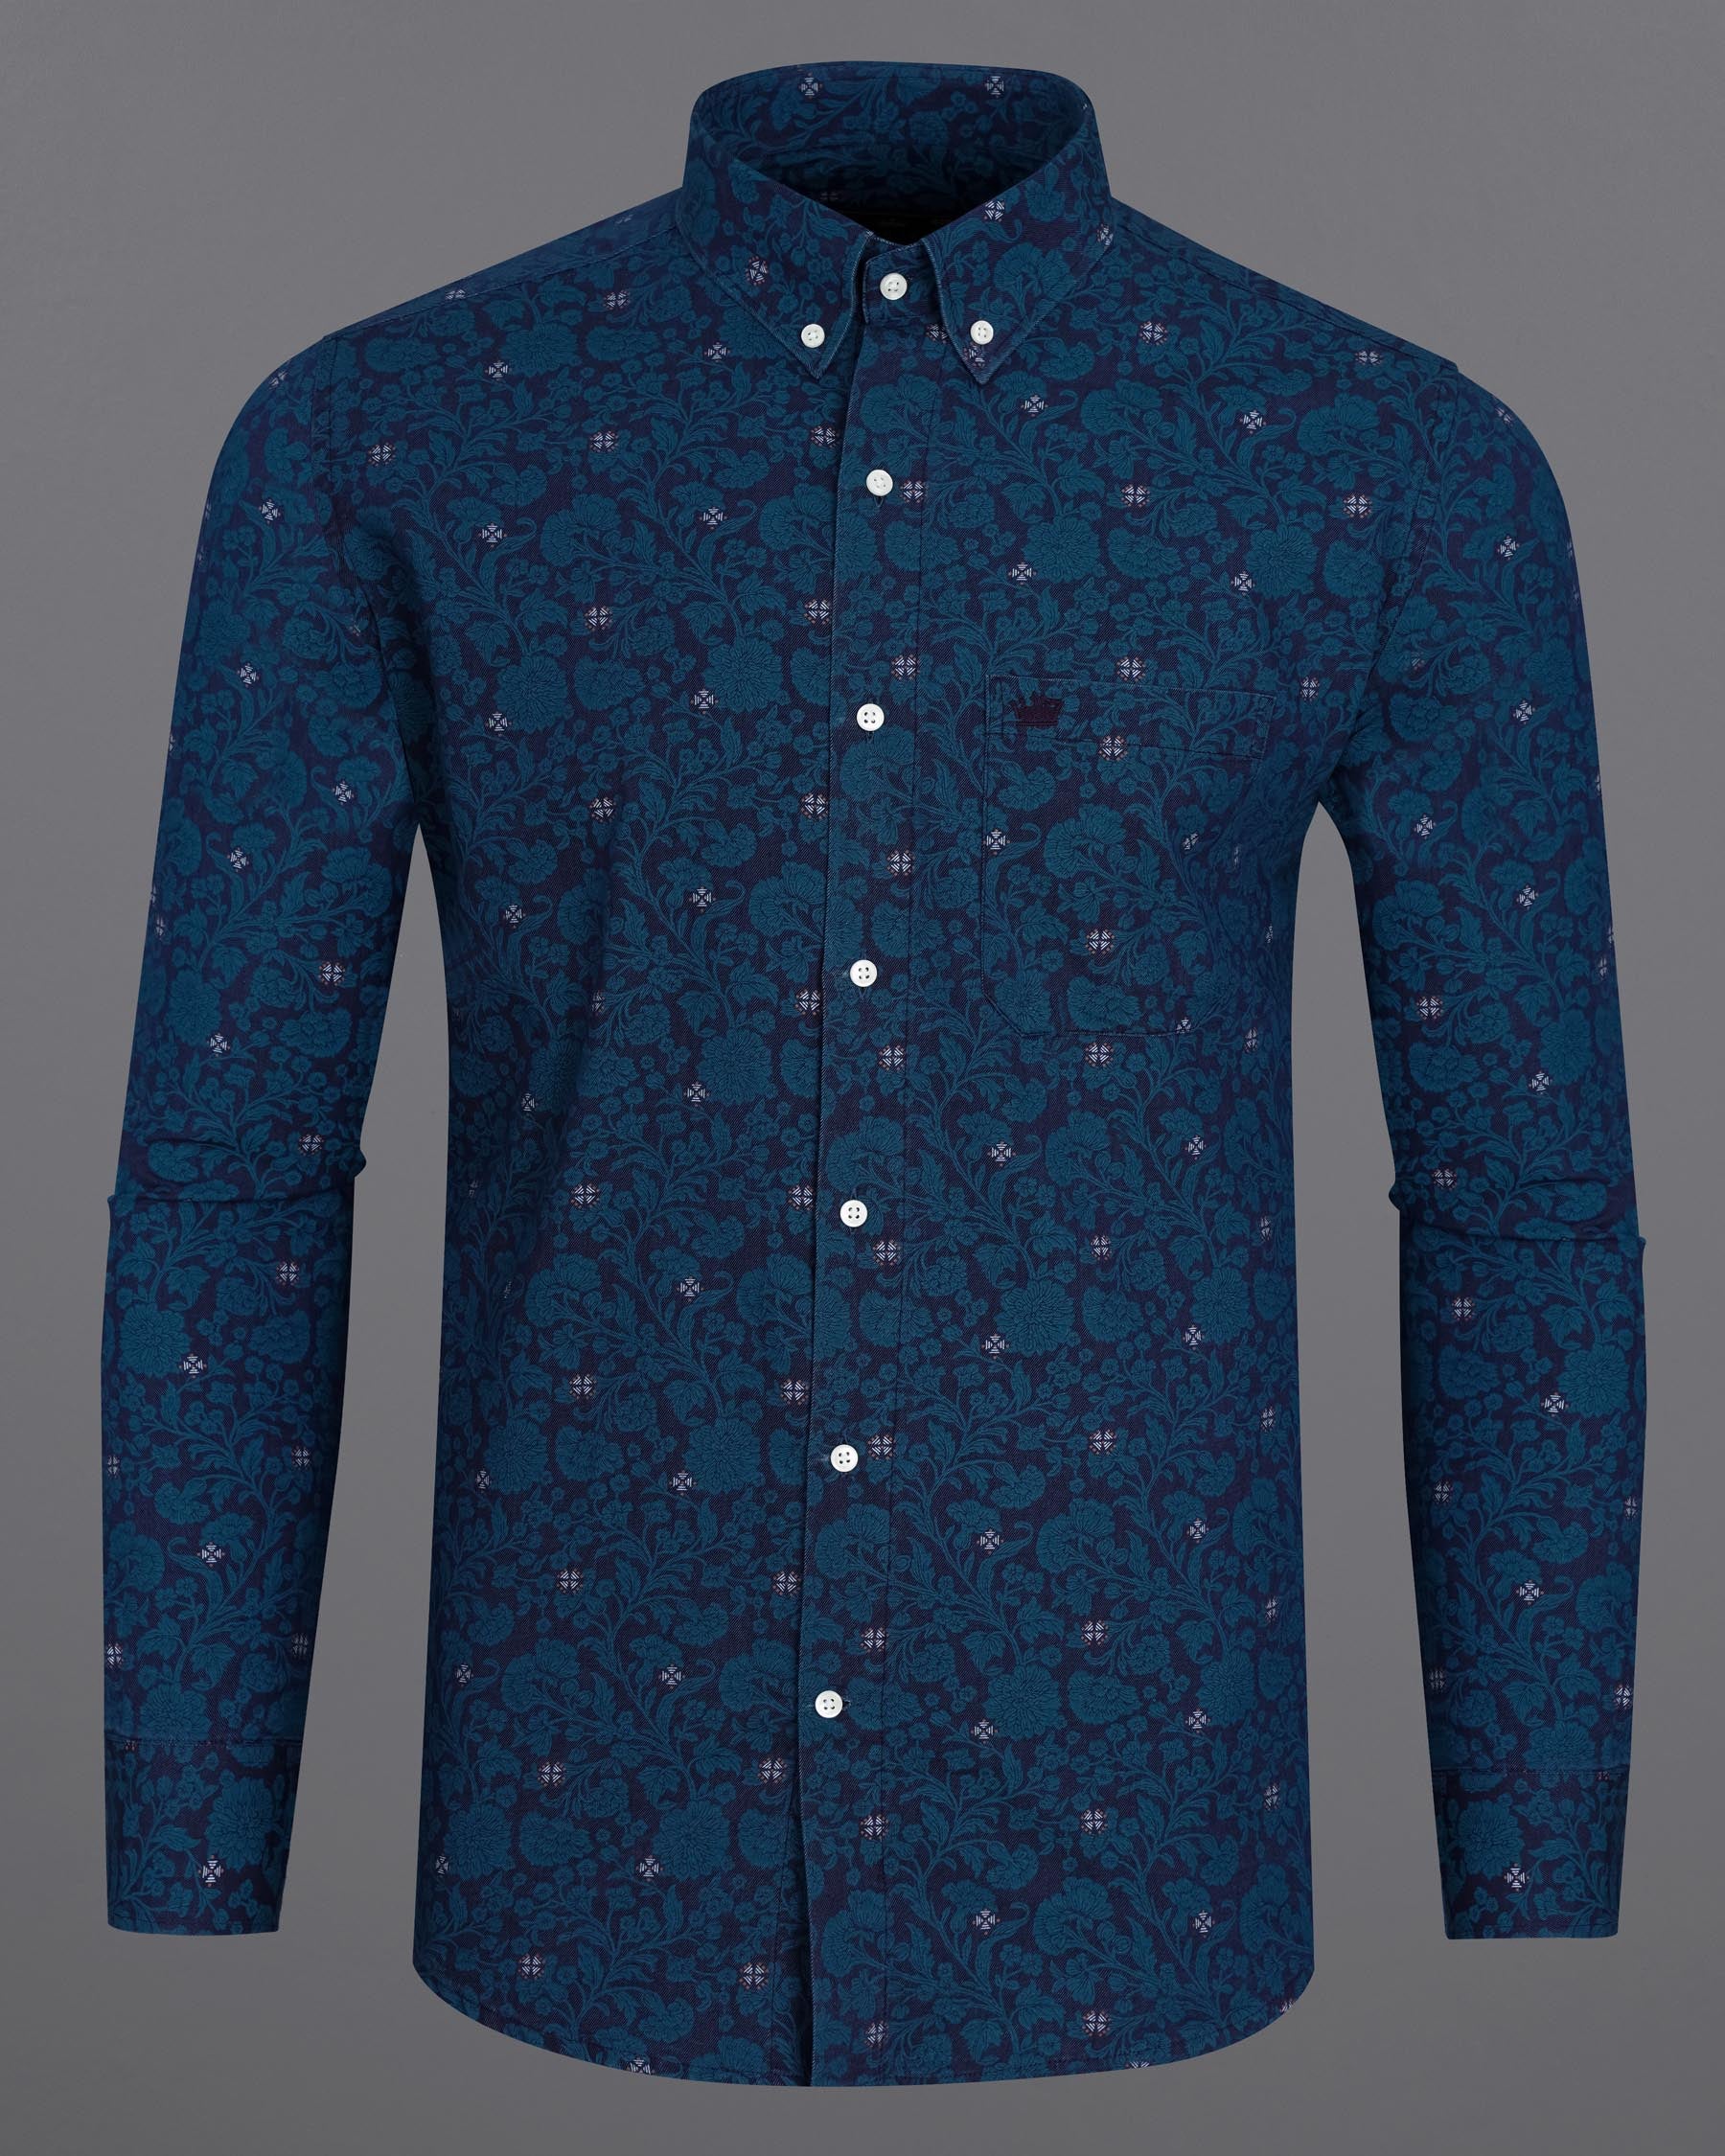 Cyprus Blue with Damask Chambray Textured Premium Cotton Shirt 7759-BD-38, 7759-BD-H-38, 7759-BD-39,7759-BD-H-39, 7759-BD-40, 7759-BD-H-40, 7759-BD-42, 7759-BD-H-42, 7759-BD-44, 7759-BD-H-44, 7759-BD-46, 7759-BD-H-46, 7759-BD-48, 7759-BD-H-48, 7759-BD-50, 7759-BD-H-50, 7759-BD-52, 7759-BD-H-52